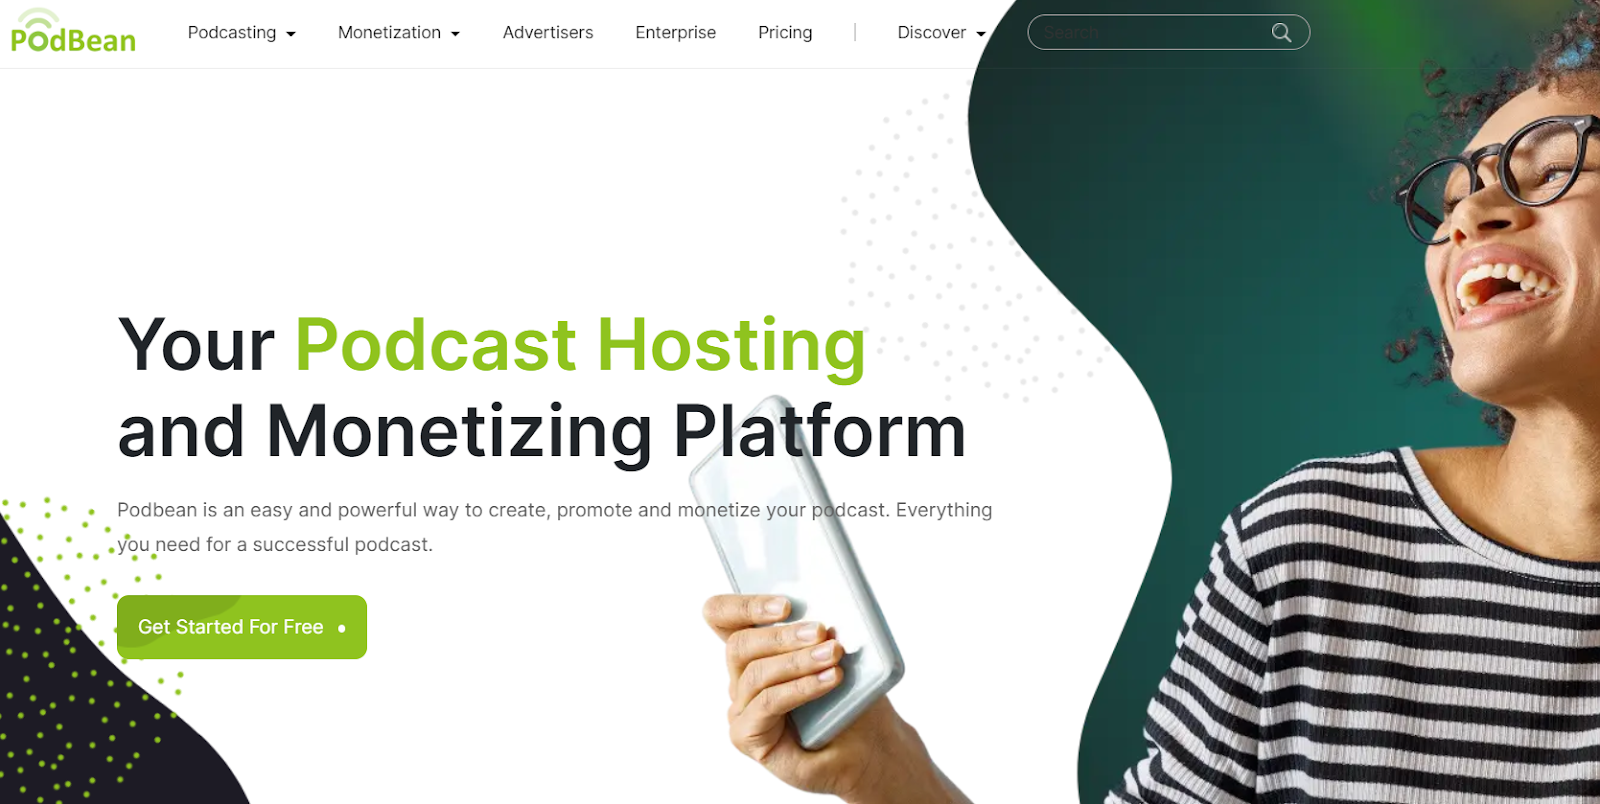 PodBean can assist with hosting and monetizing your podcast.